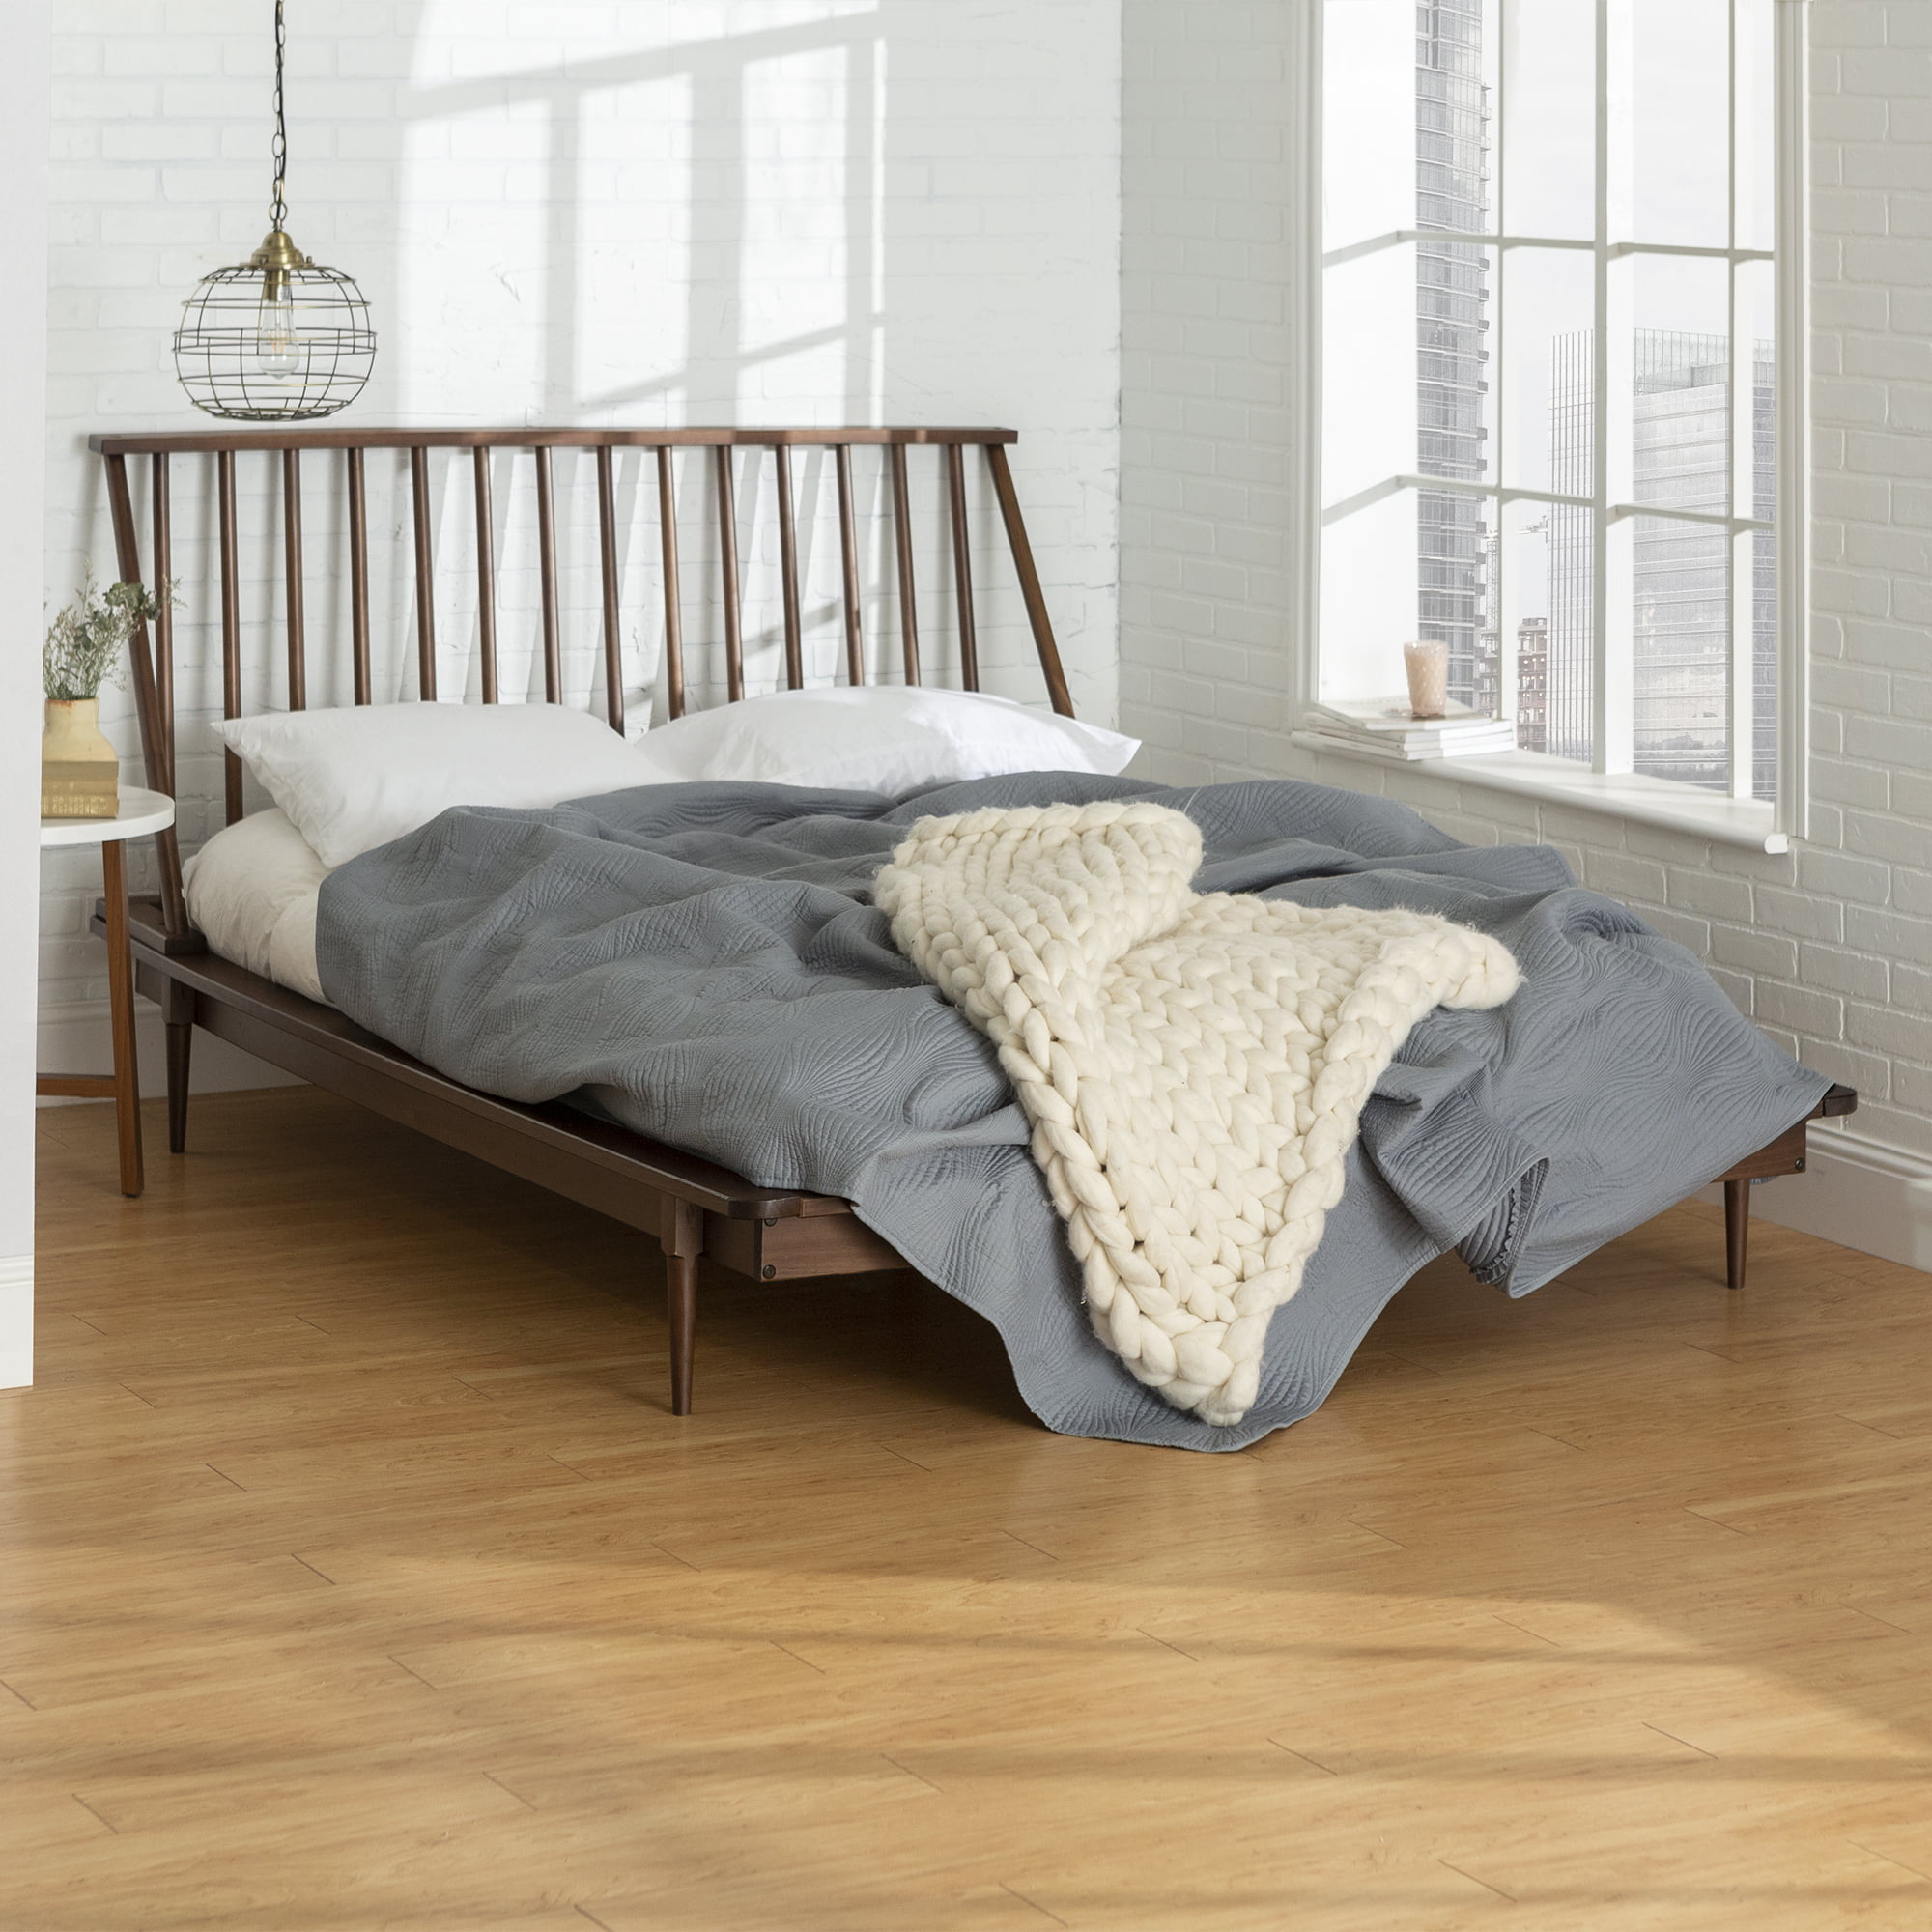 wood spindle bed